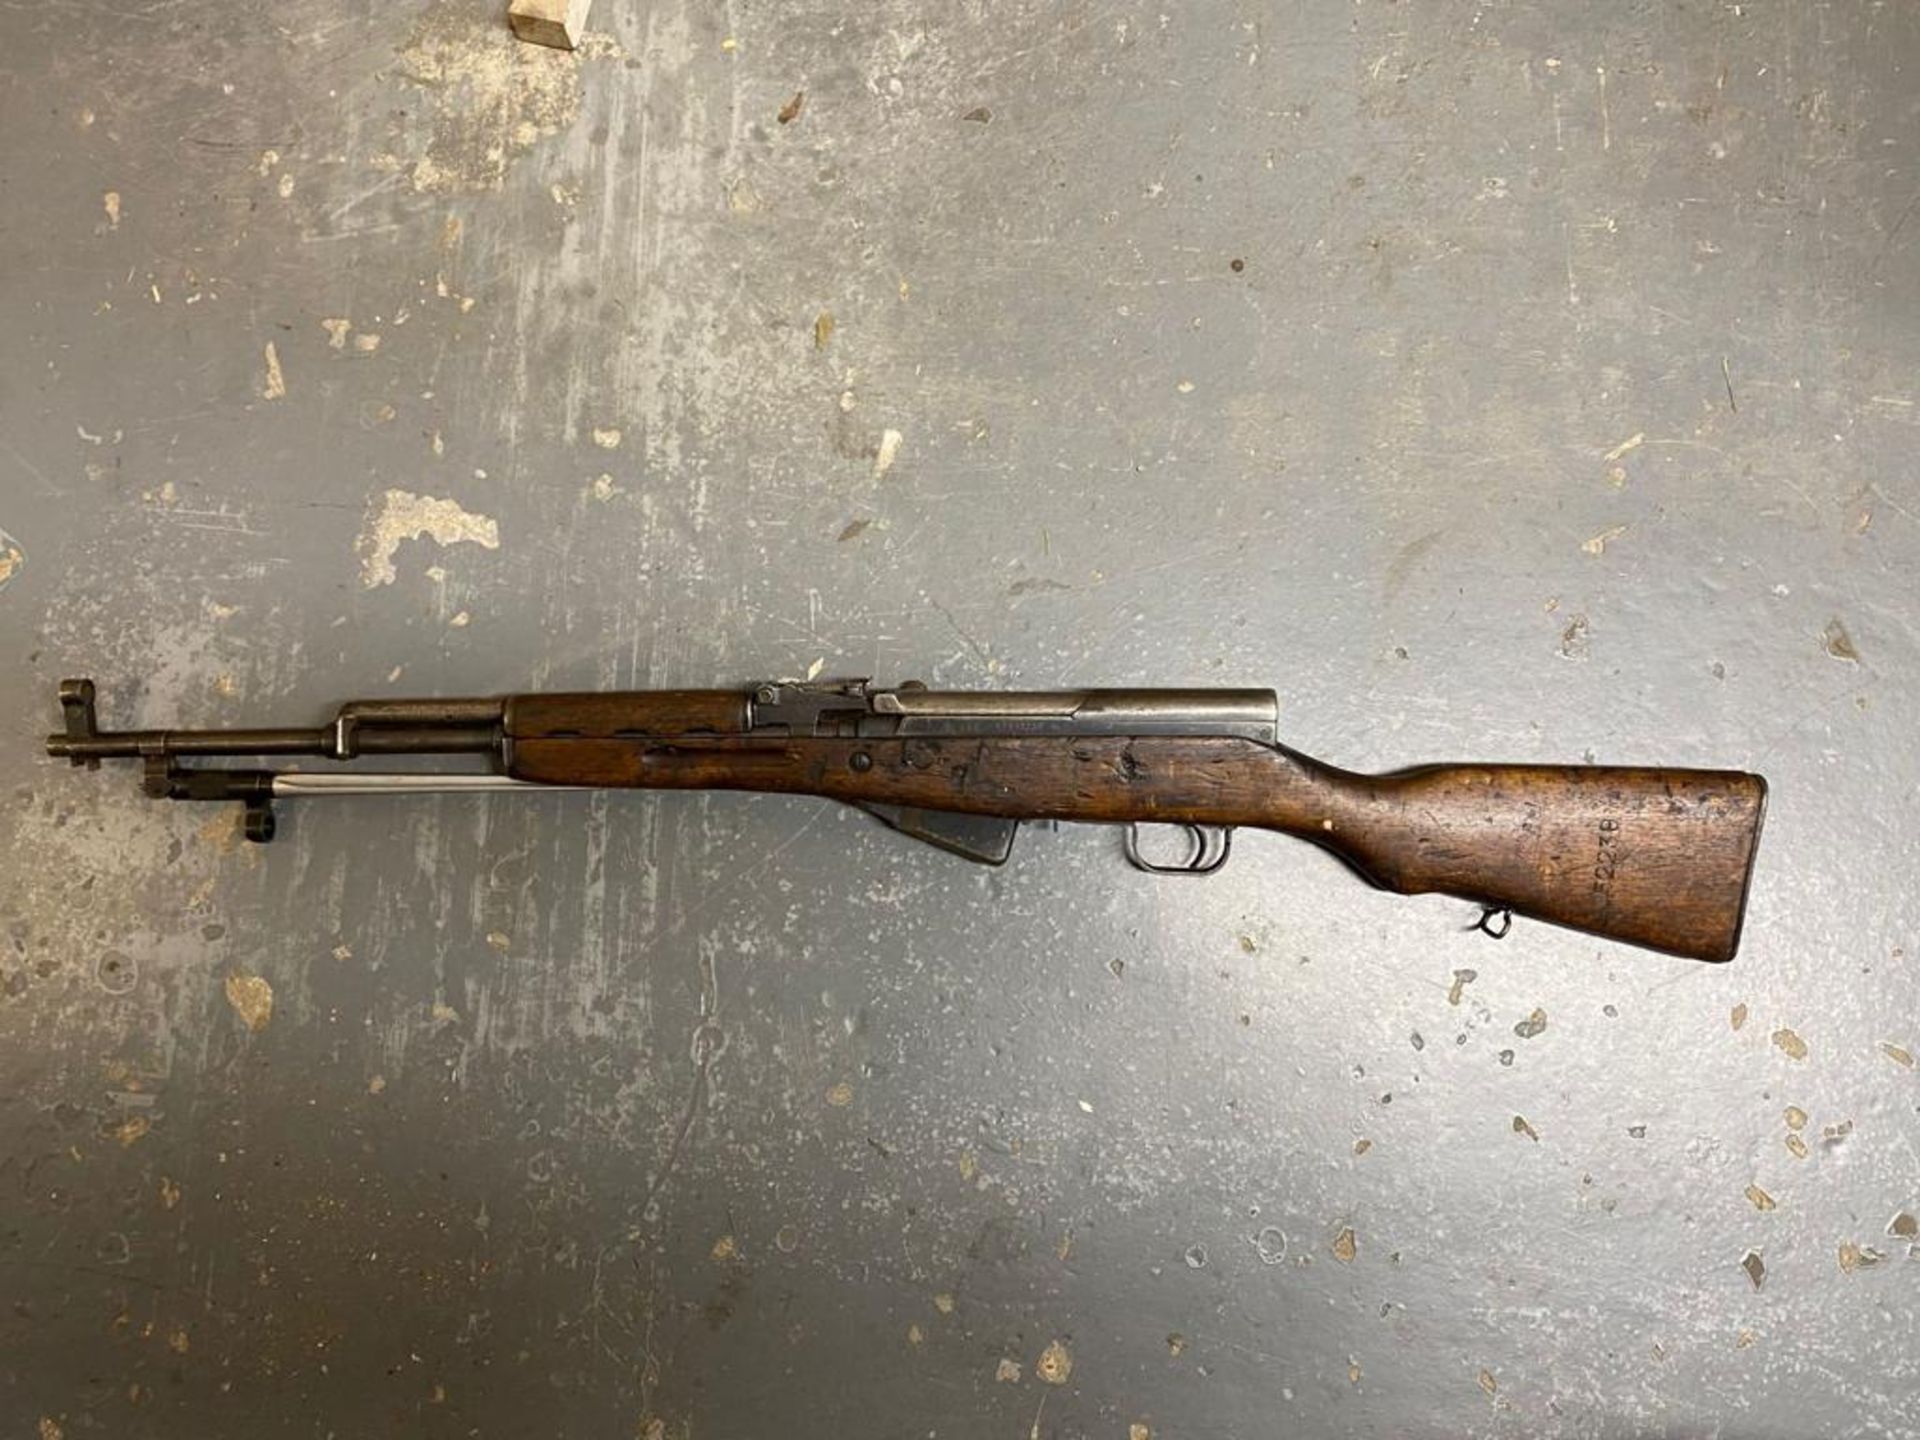 A Deactivated Chinese SKS - Self Loading Rifle. These 7.62 mm calibre rifles were originally made in - Image 2 of 3